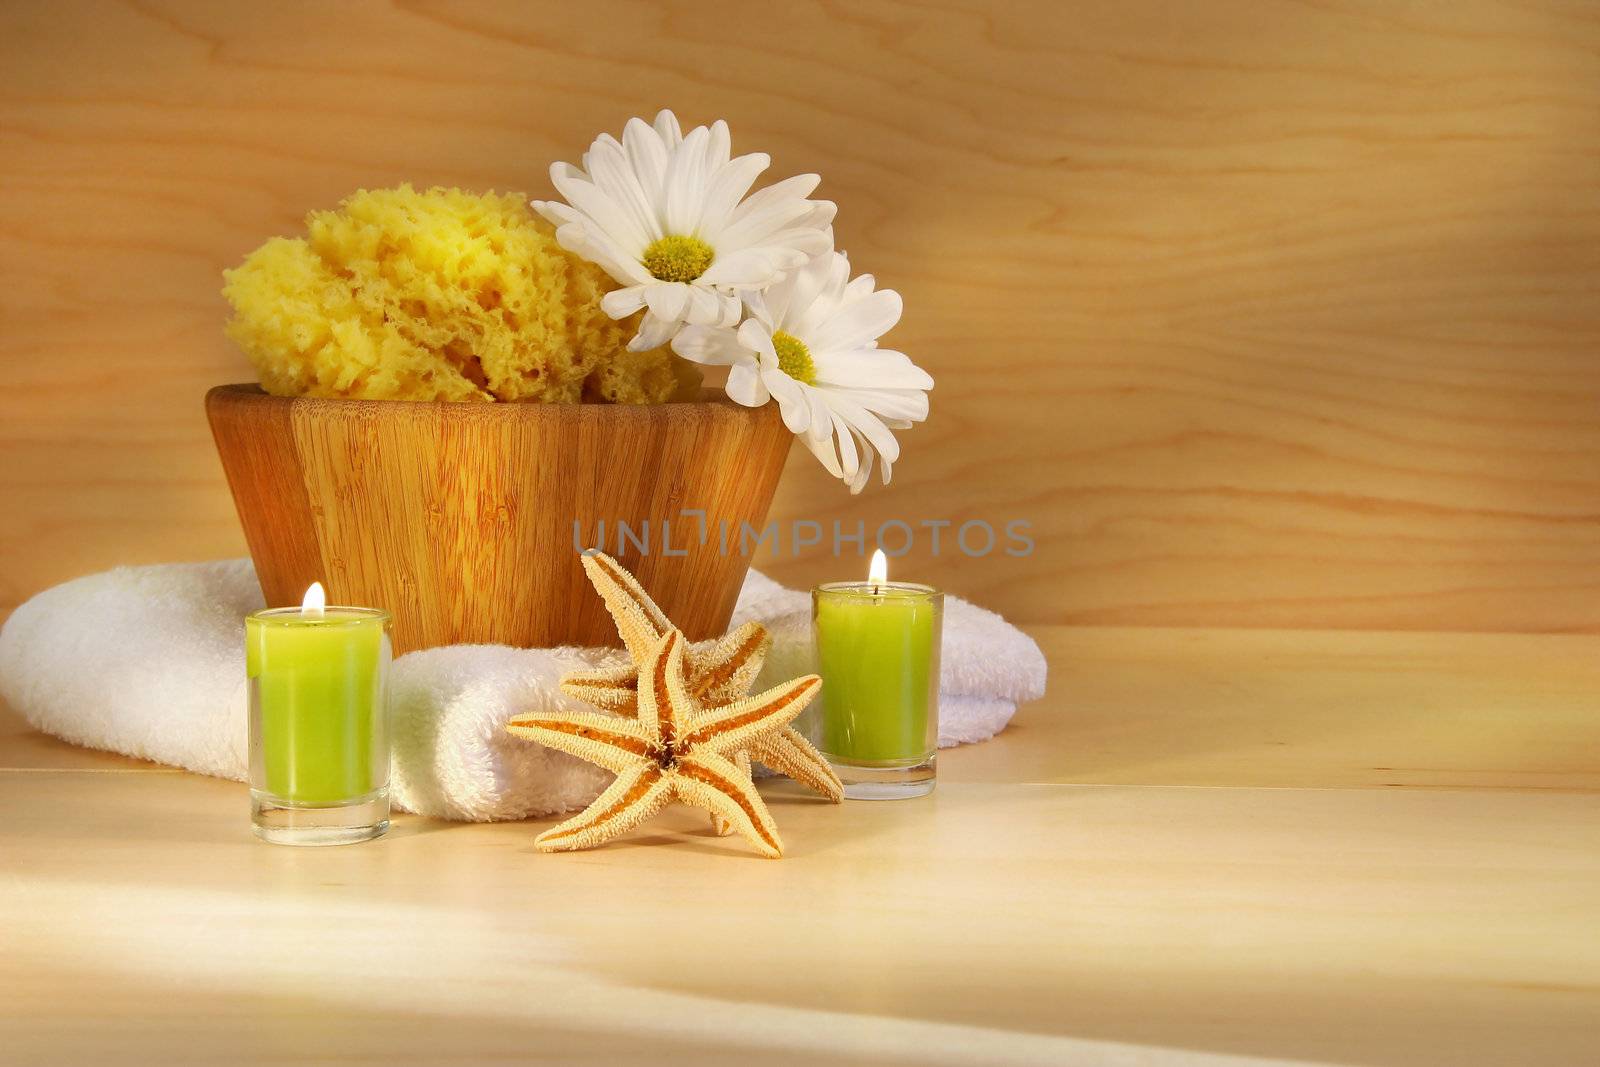 Wooden bowl, sponge, towel and candles on wooden counter